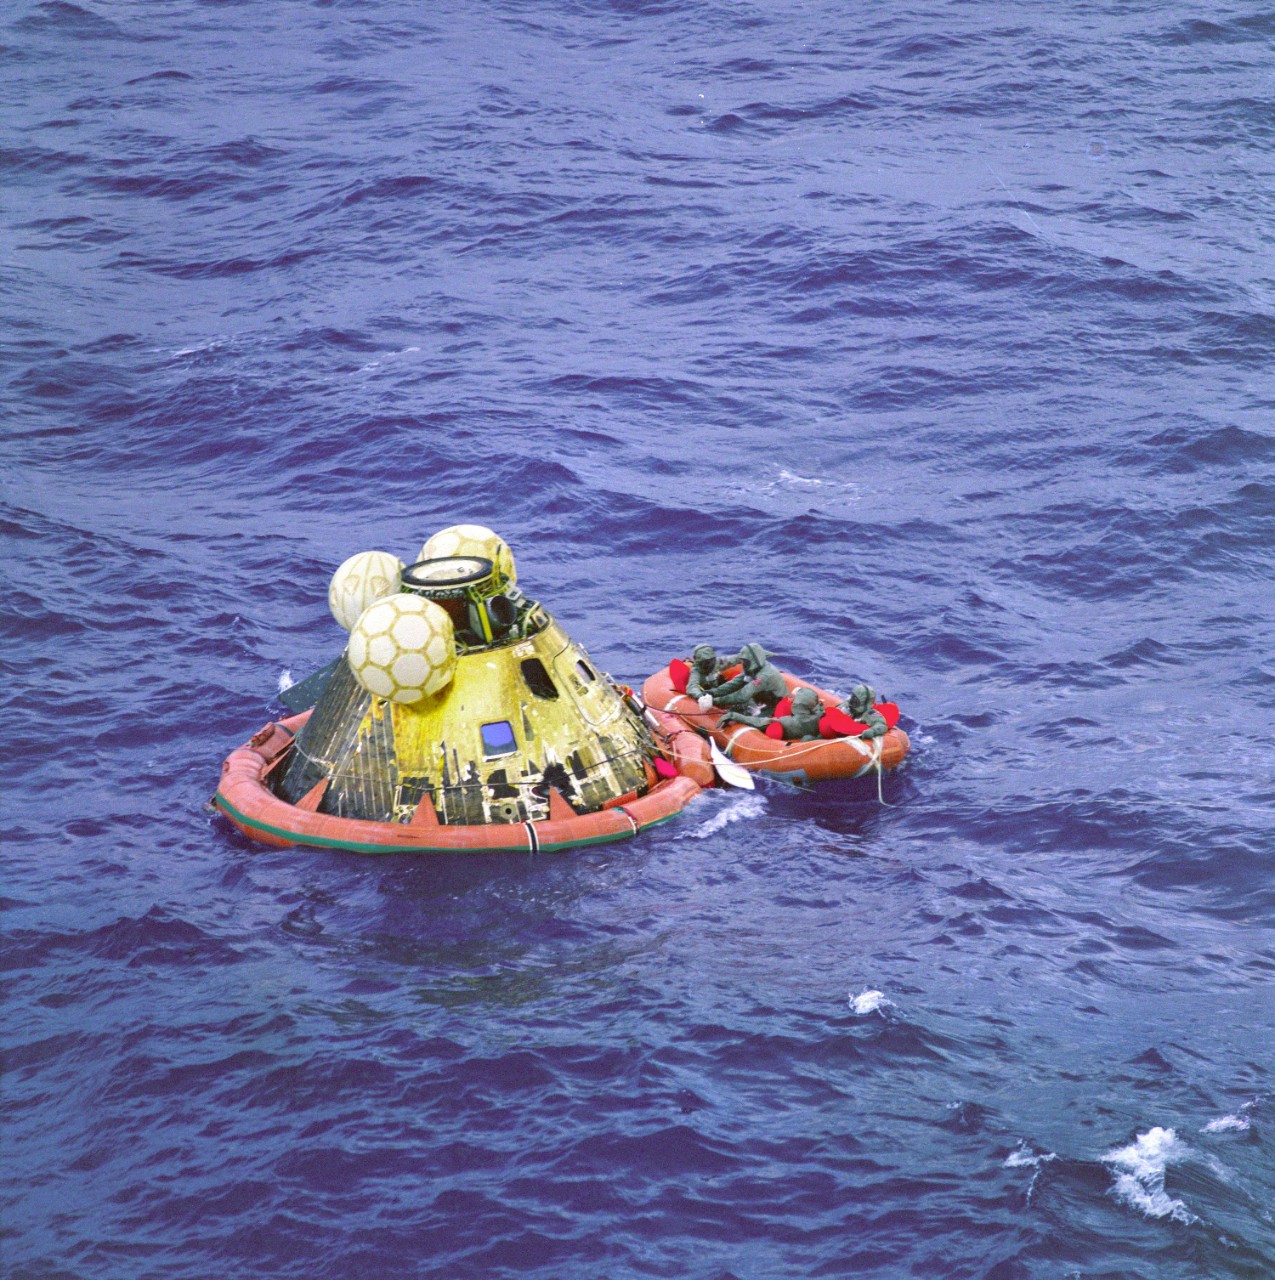 The Apollo 11 crew await pickup by a helicopter from the USS Hornet, prime recovery ship for the historic lunar landing mission. The fourth man in the life raft is a United States Navy underwater demolition team swimmer. All four men are wearing biological isolation garments.